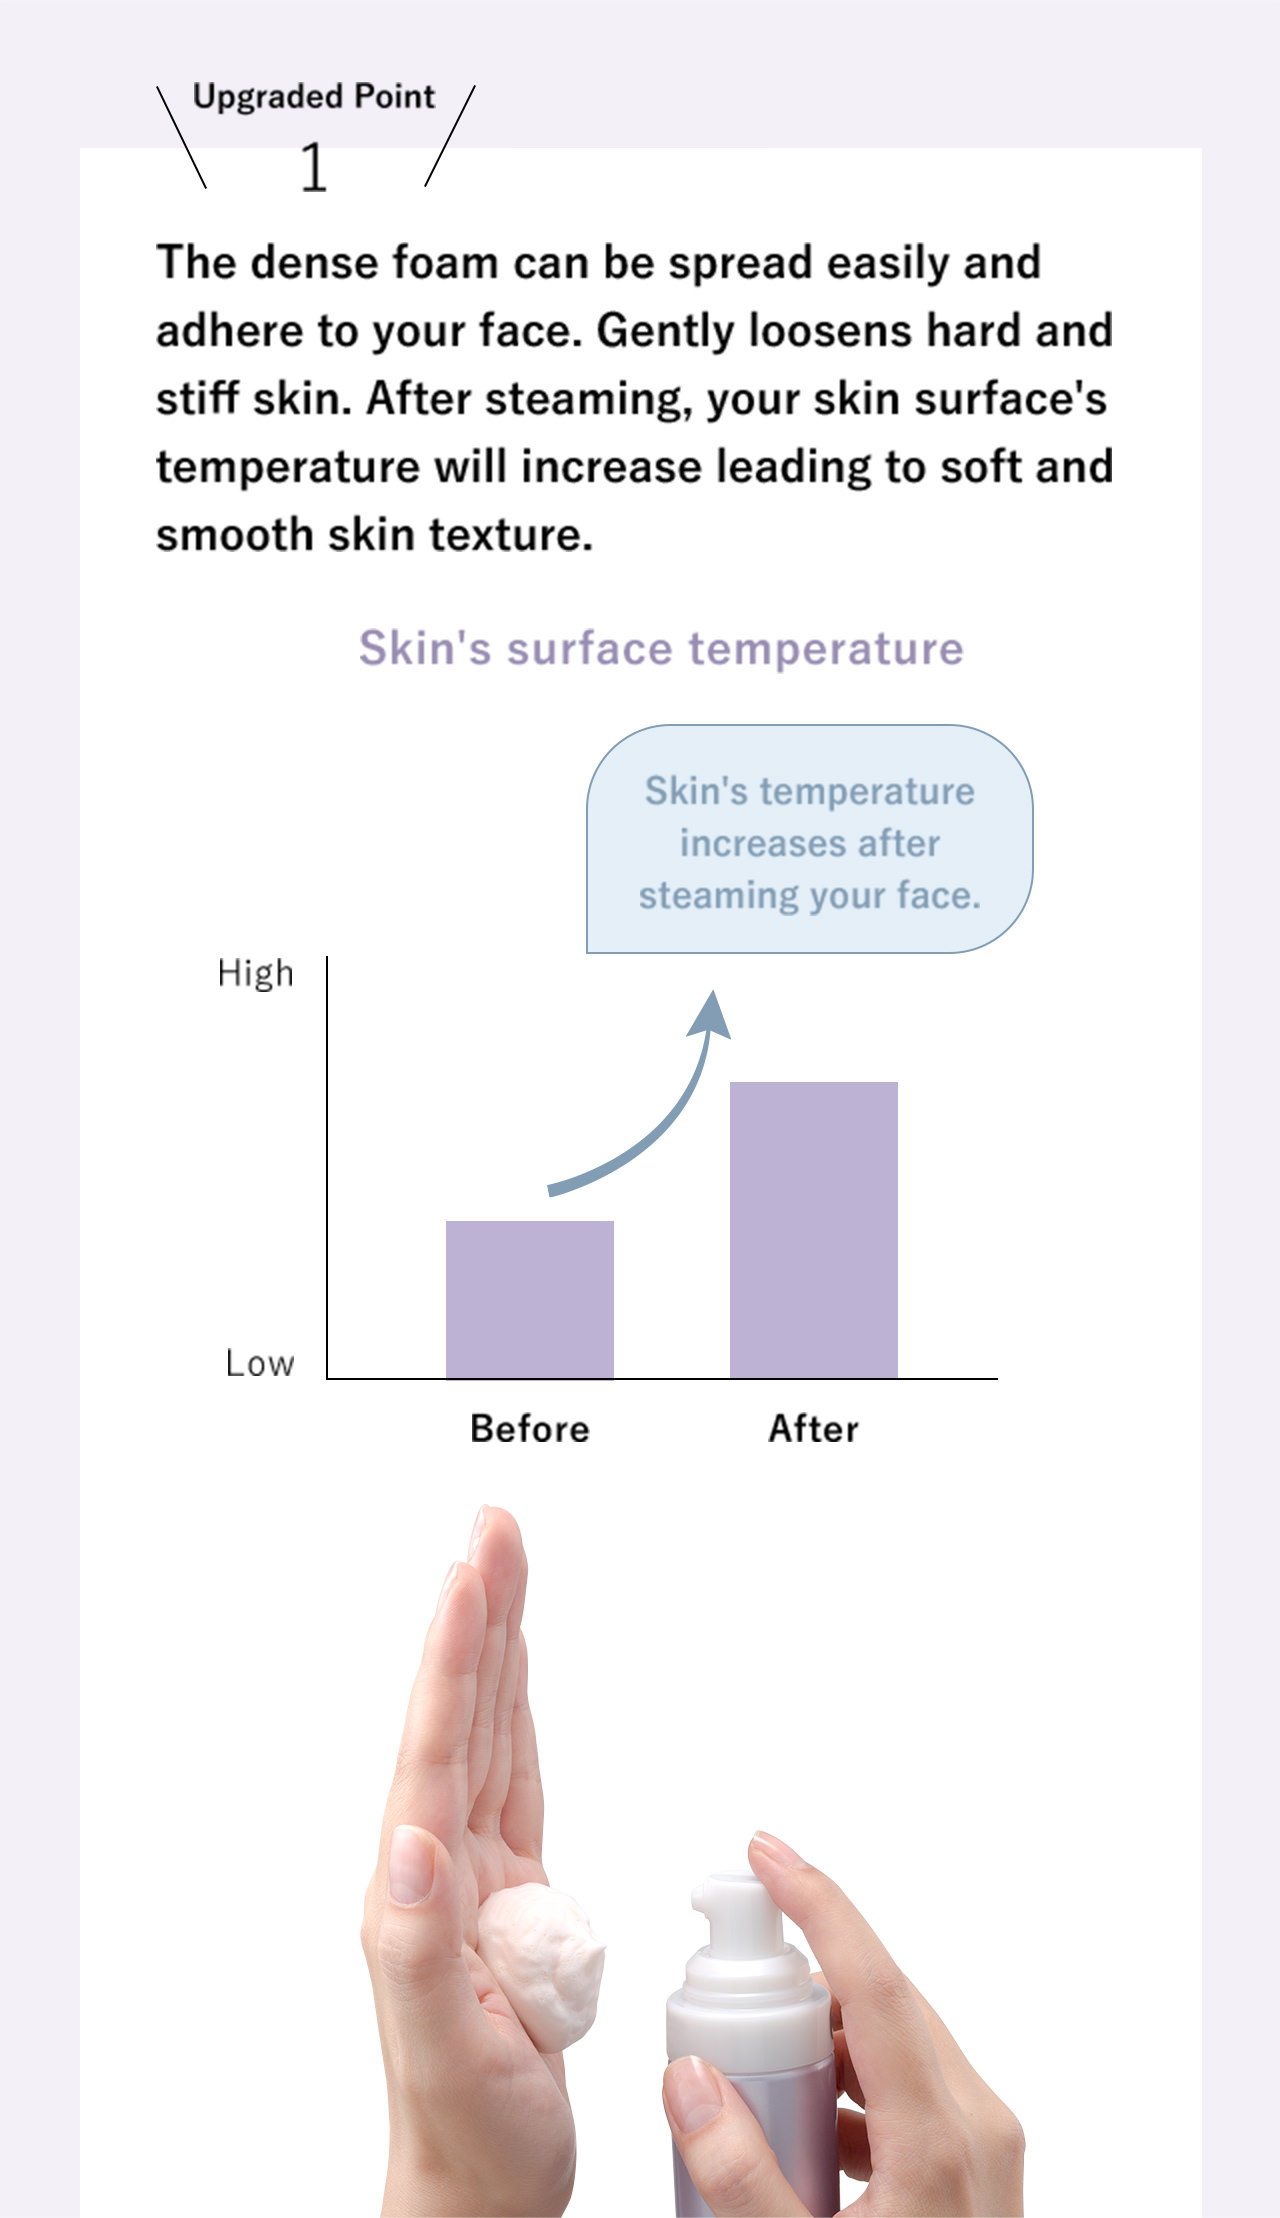 Upgraded Point 1: The dense foam can be spread easily and adhere to your face. Gently loosens hard and stiff skin. After steaming, your skin surface's temperature will increase leading to soft and smooth skin texture.